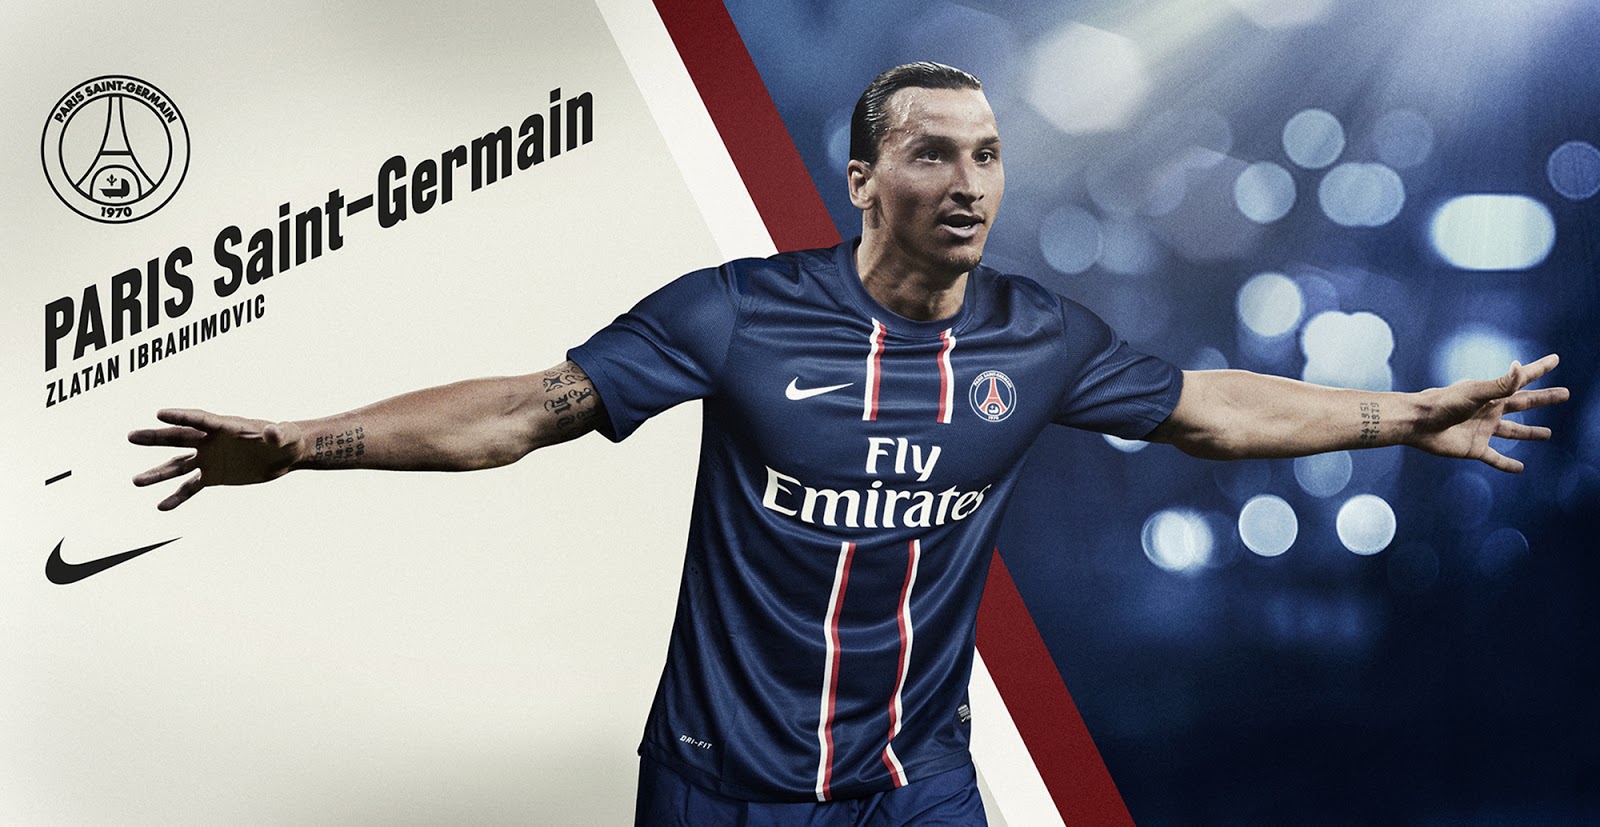 Wallpapers PSG 2013 2 HD FULL HD High Definition Wallpapers